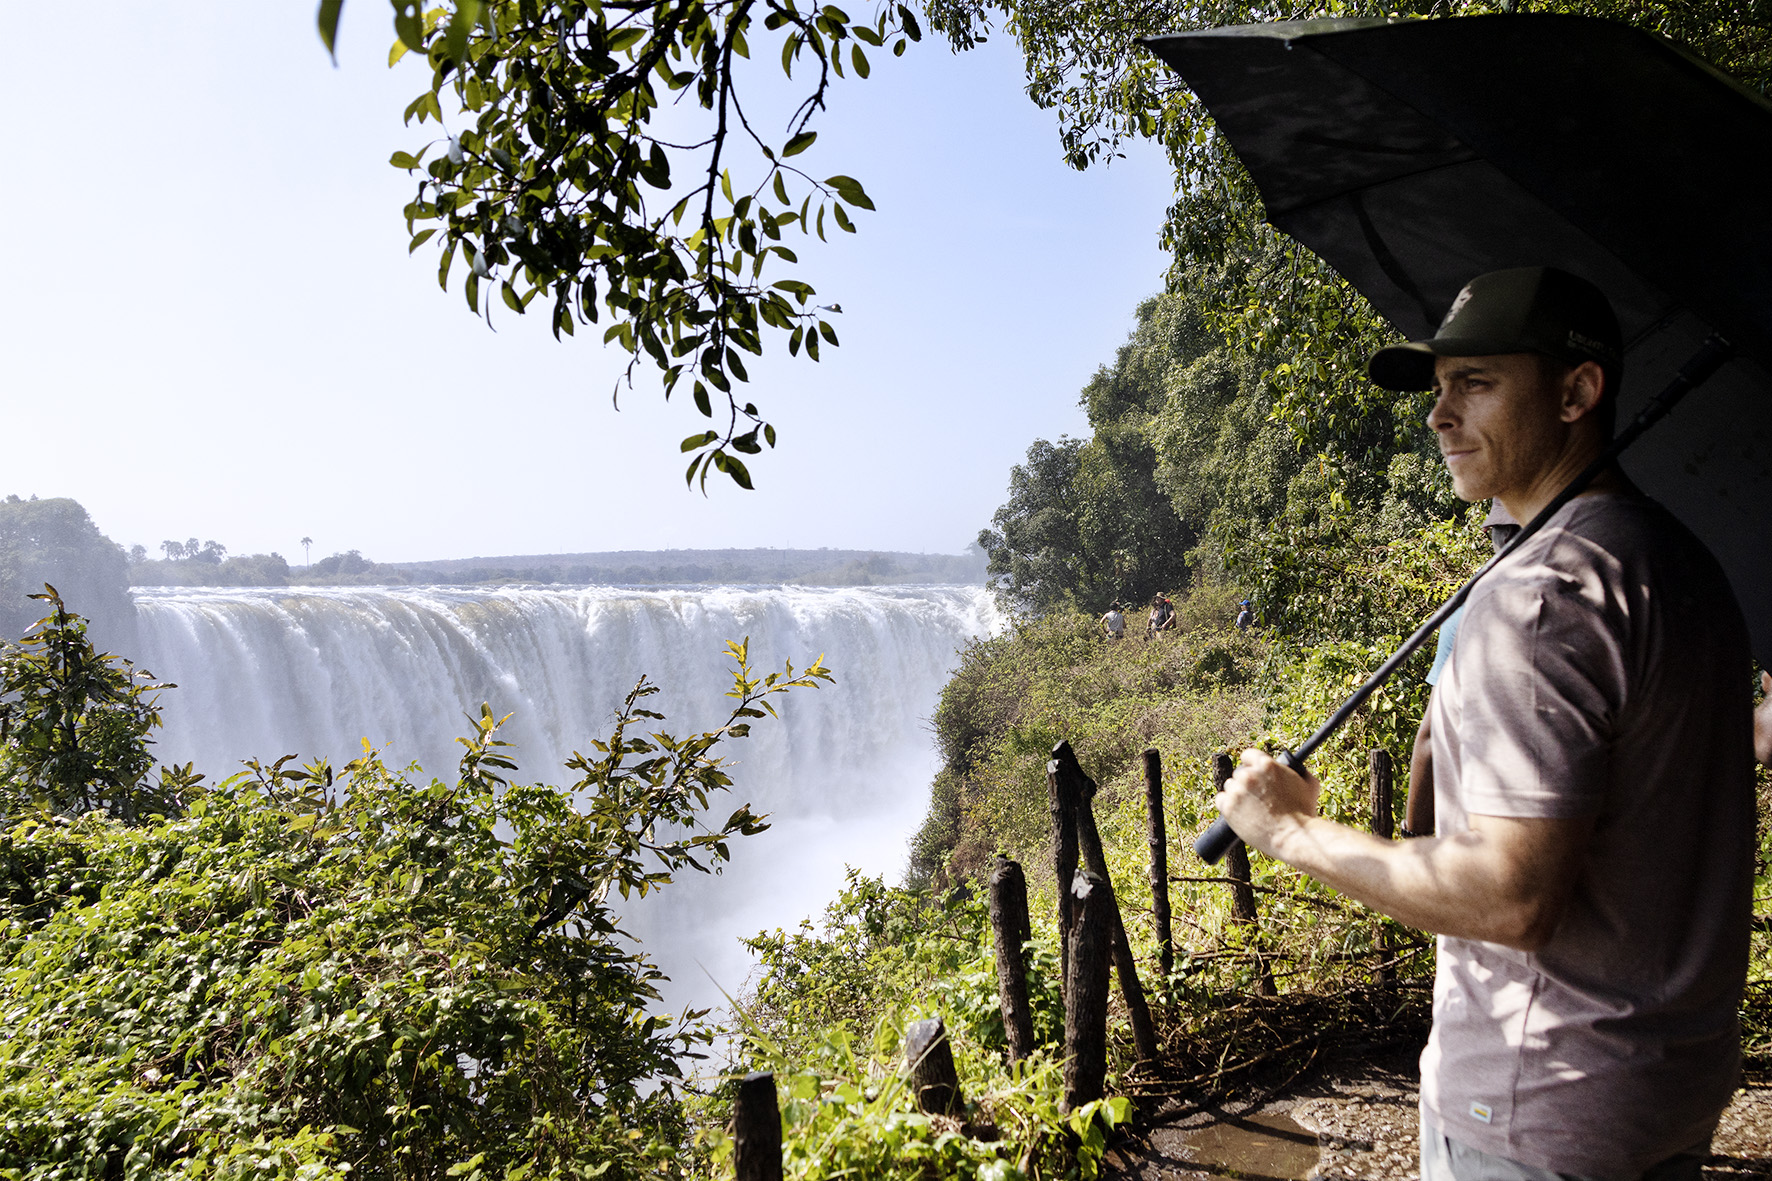 Co-founder, Kyle Green, viewing Victoria Falls in Zimbabwe